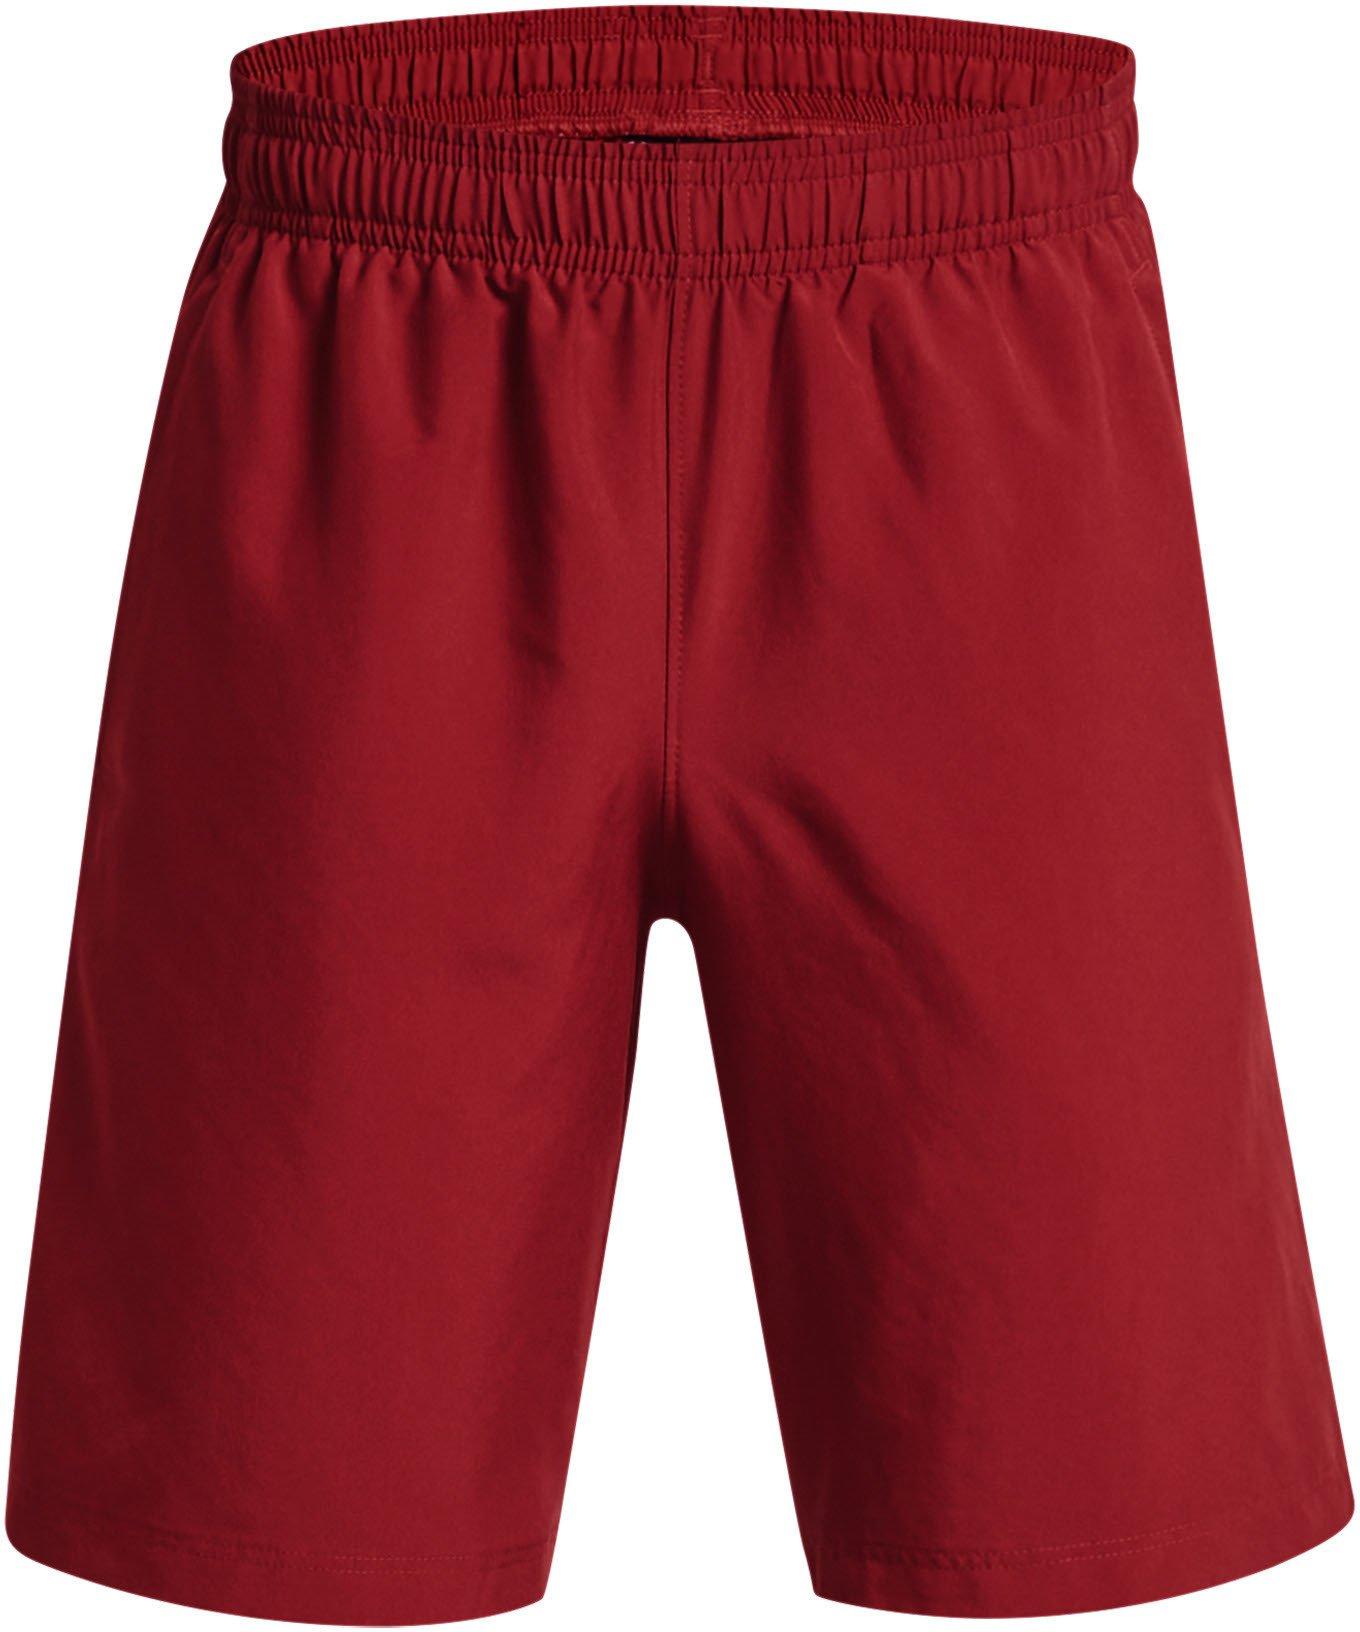 Under Armour Woven Graphic Shorts-RED L